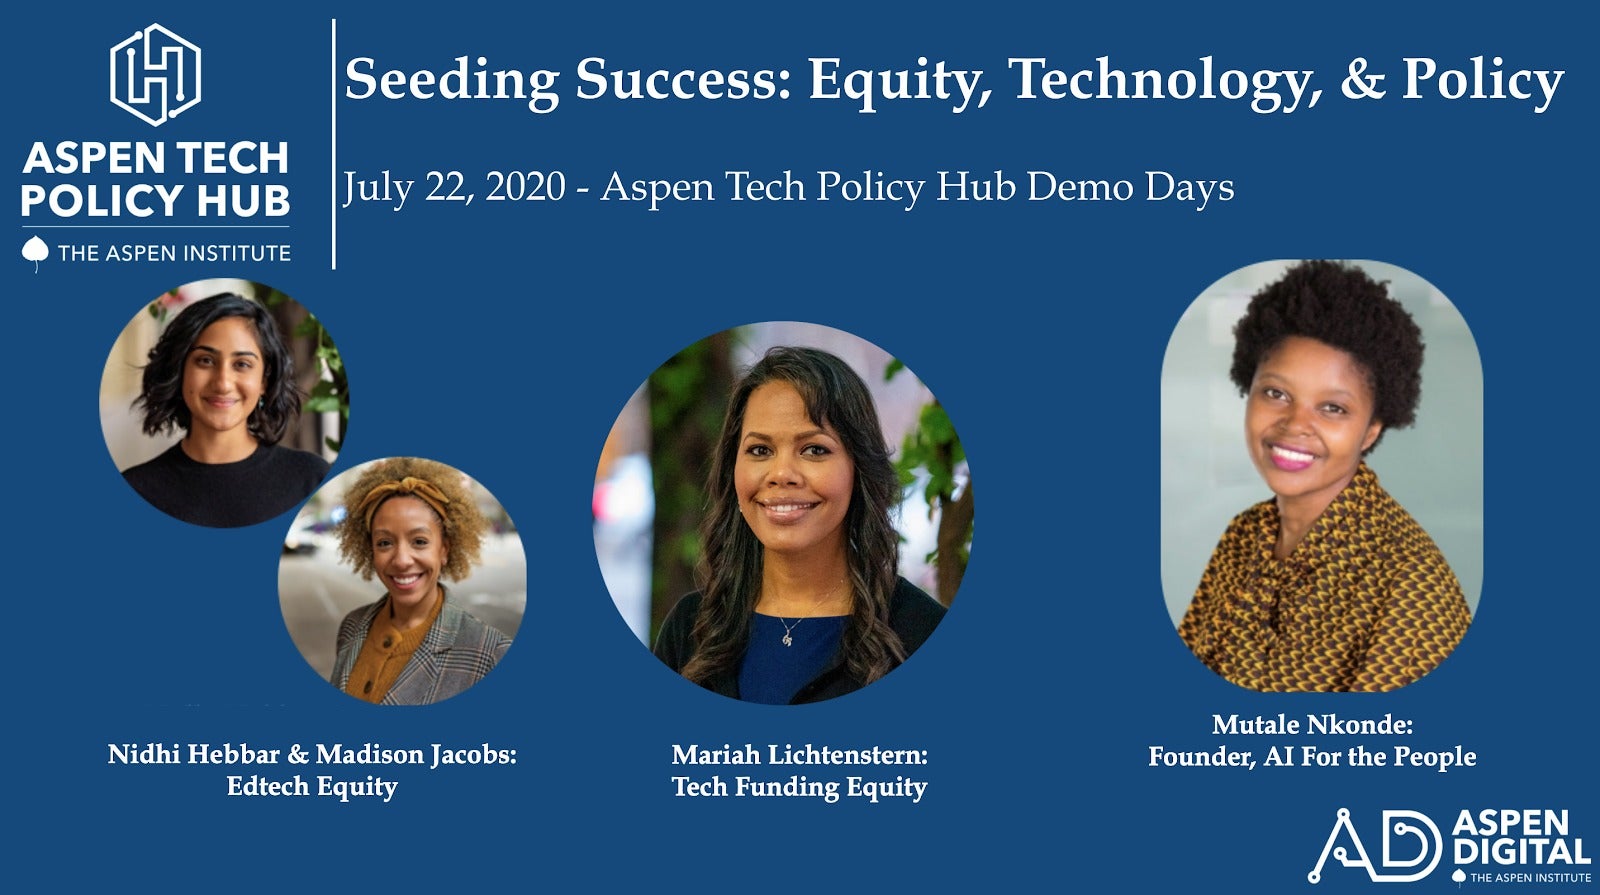 Seeding Success: Equity, Technology & Policy